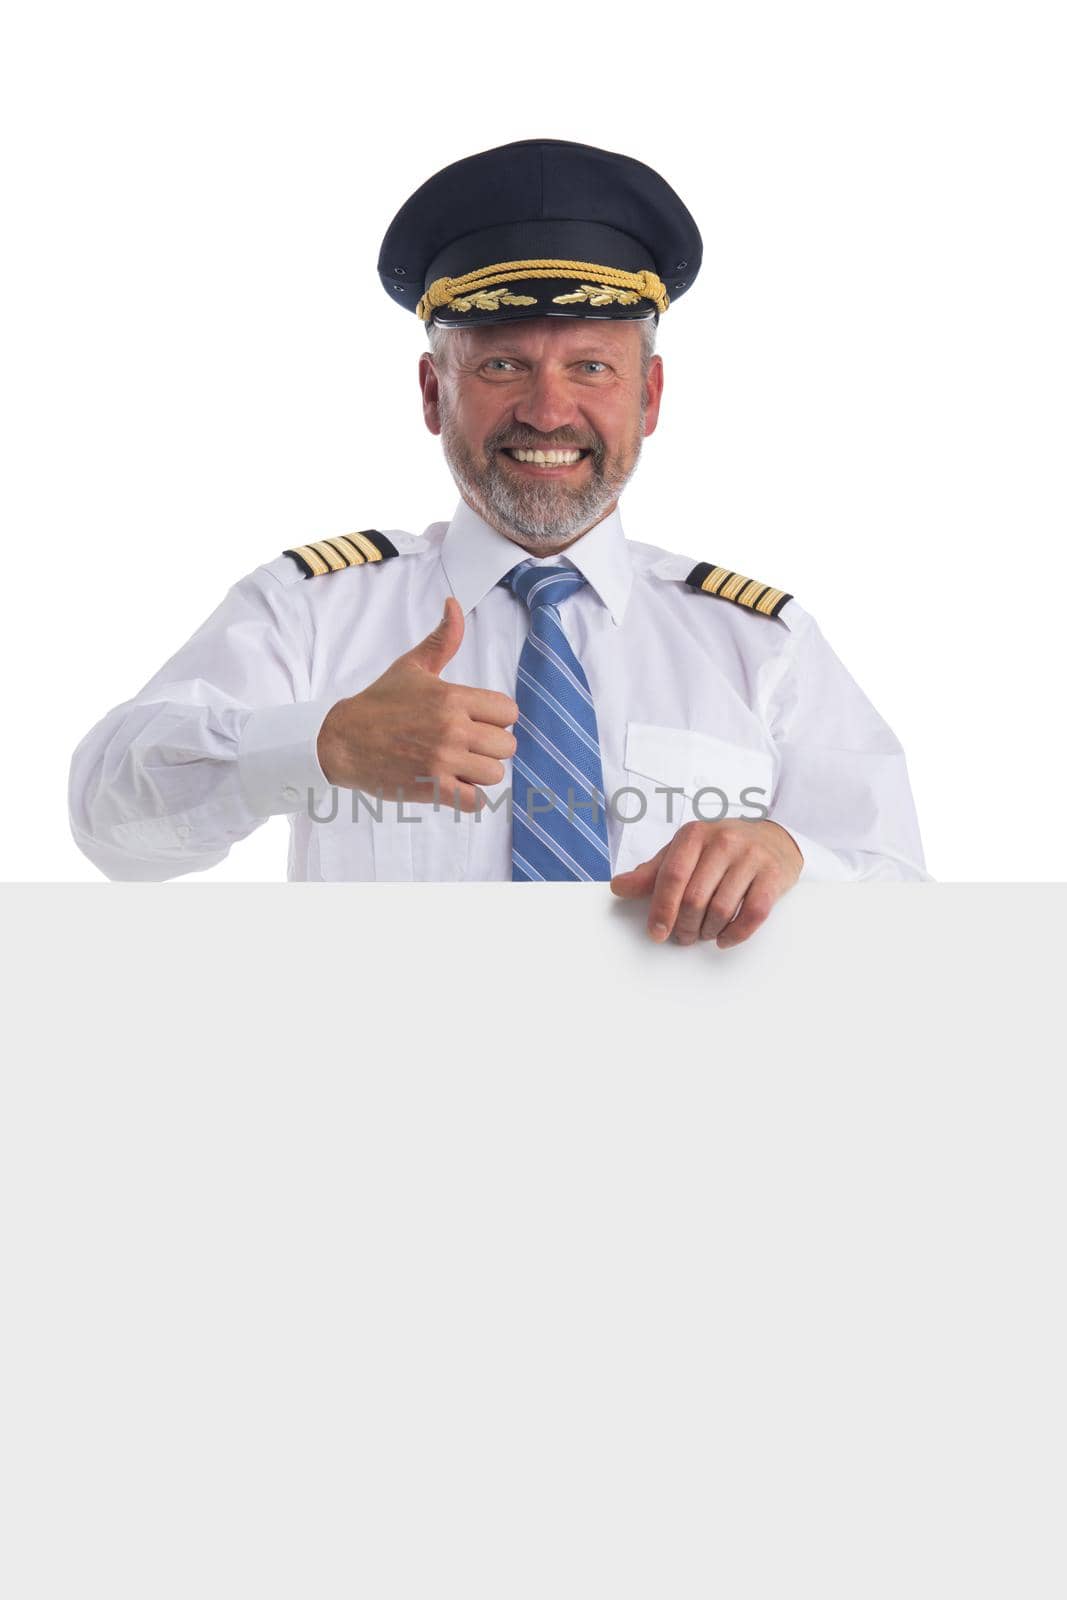 Pilot holds blank banner by ALotOfPeople